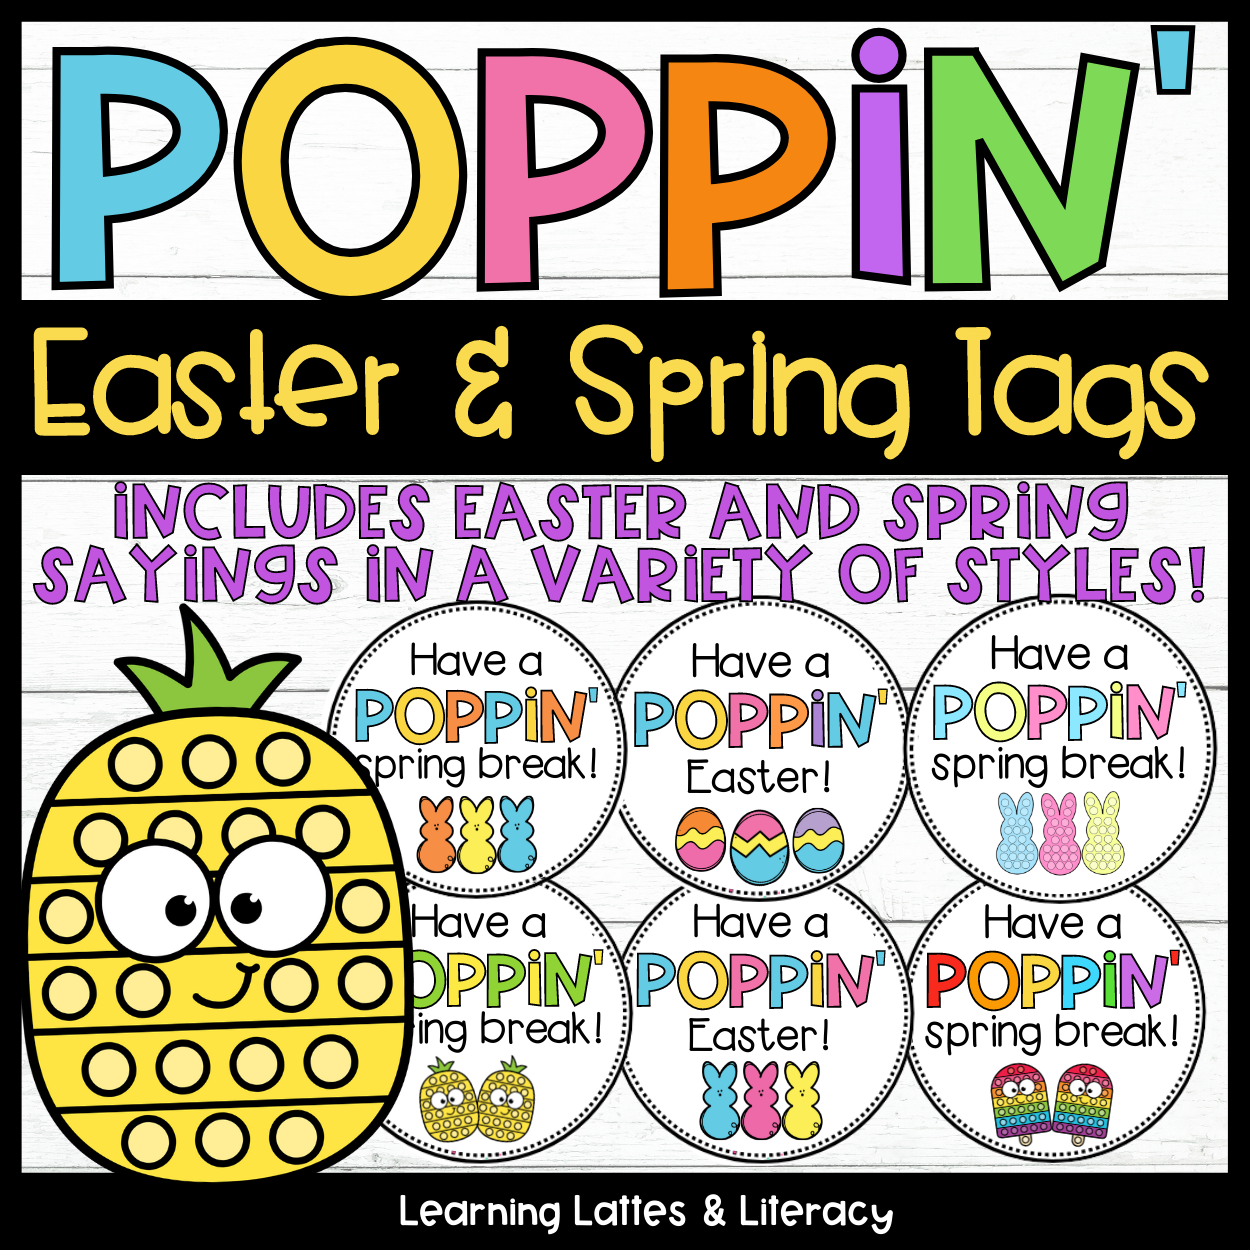 Poppin Easter Tags Poppin Spring Break Tags Peep Bunny Popit Fidget Gift Tags Have a Poppin Spring Break Poppin Easter